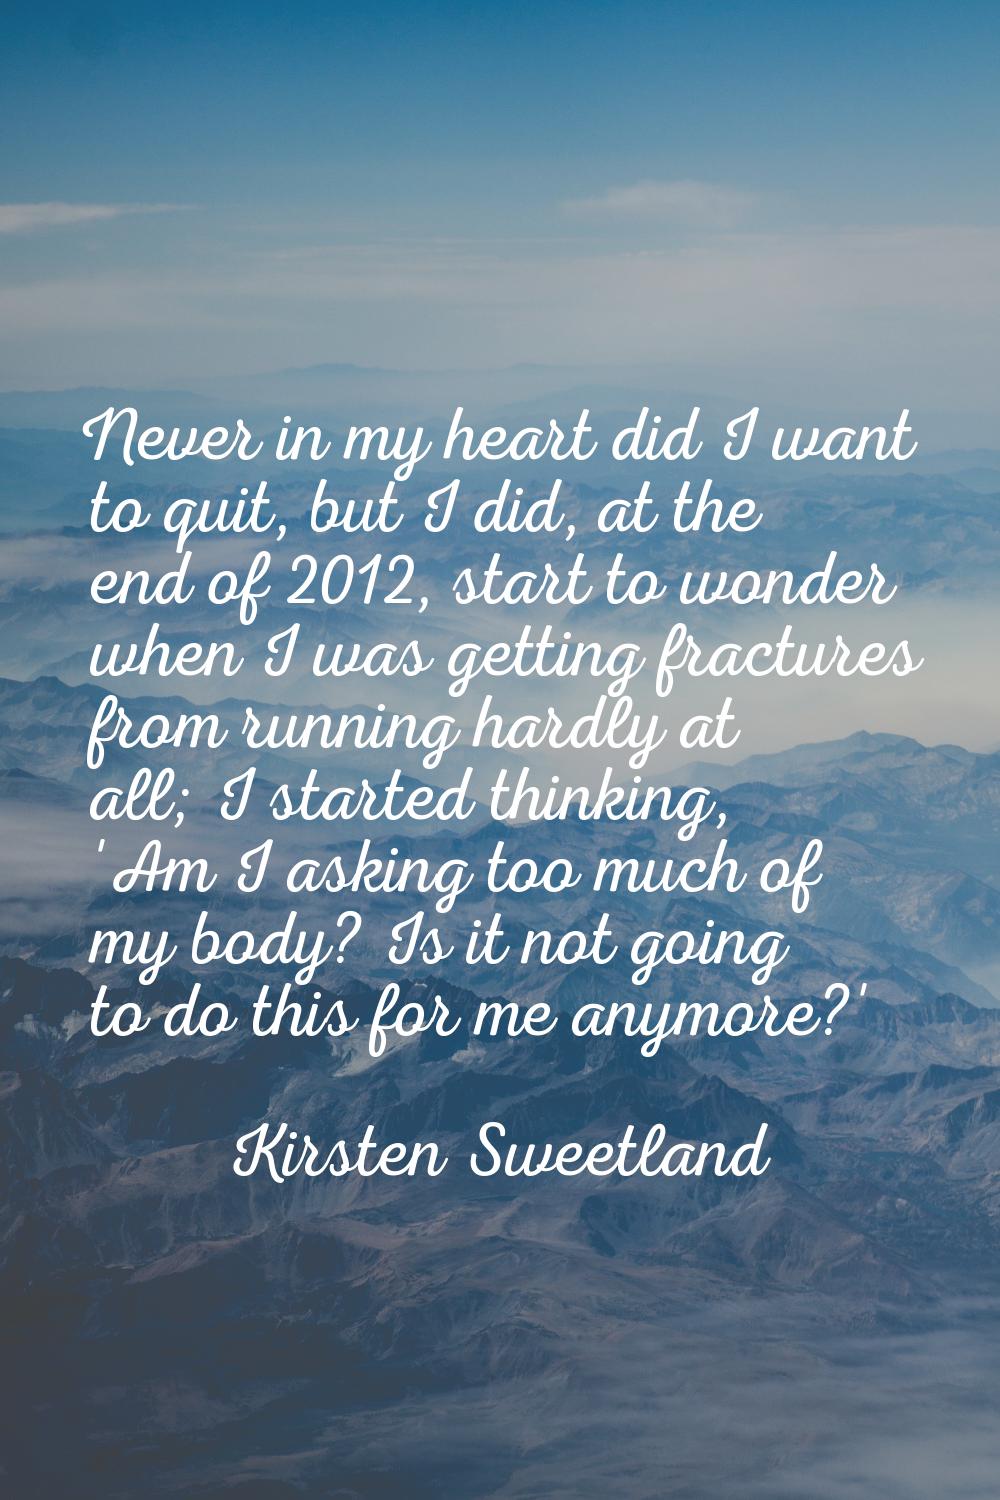 Never in my heart did I want to quit, but I did, at the end of 2012, start to wonder when I was get